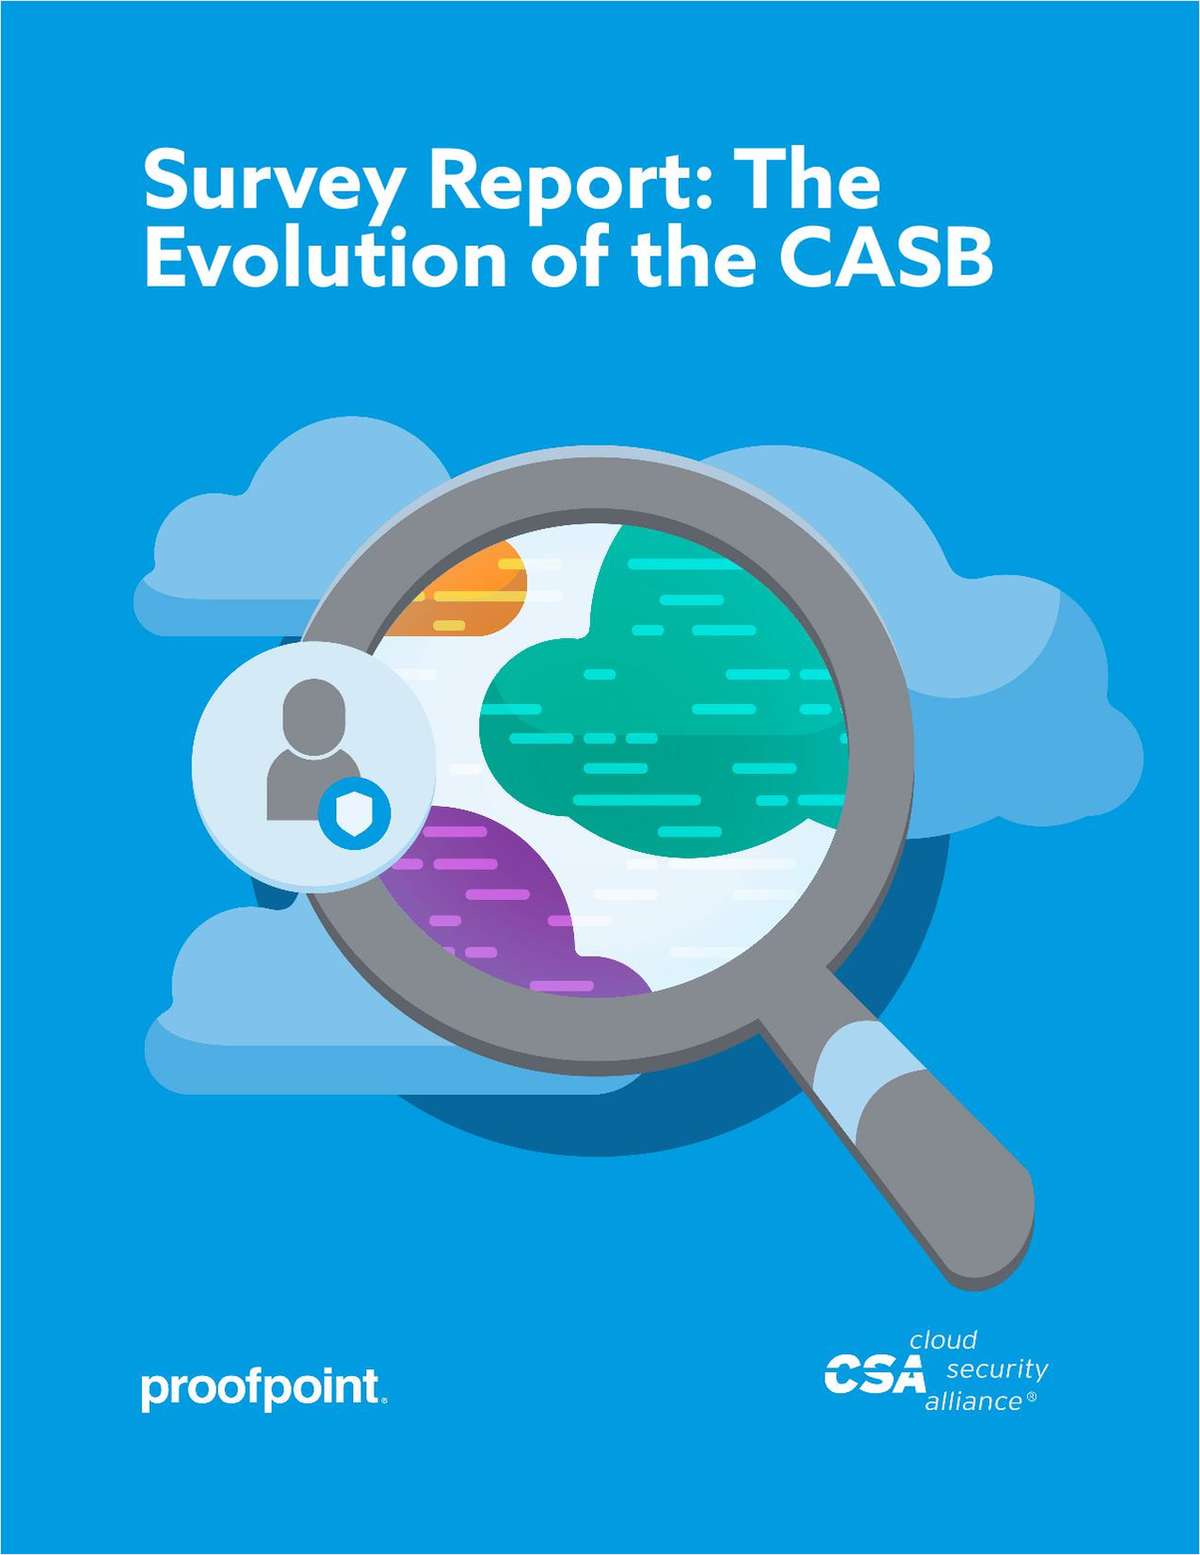 The Evolution of the CASB